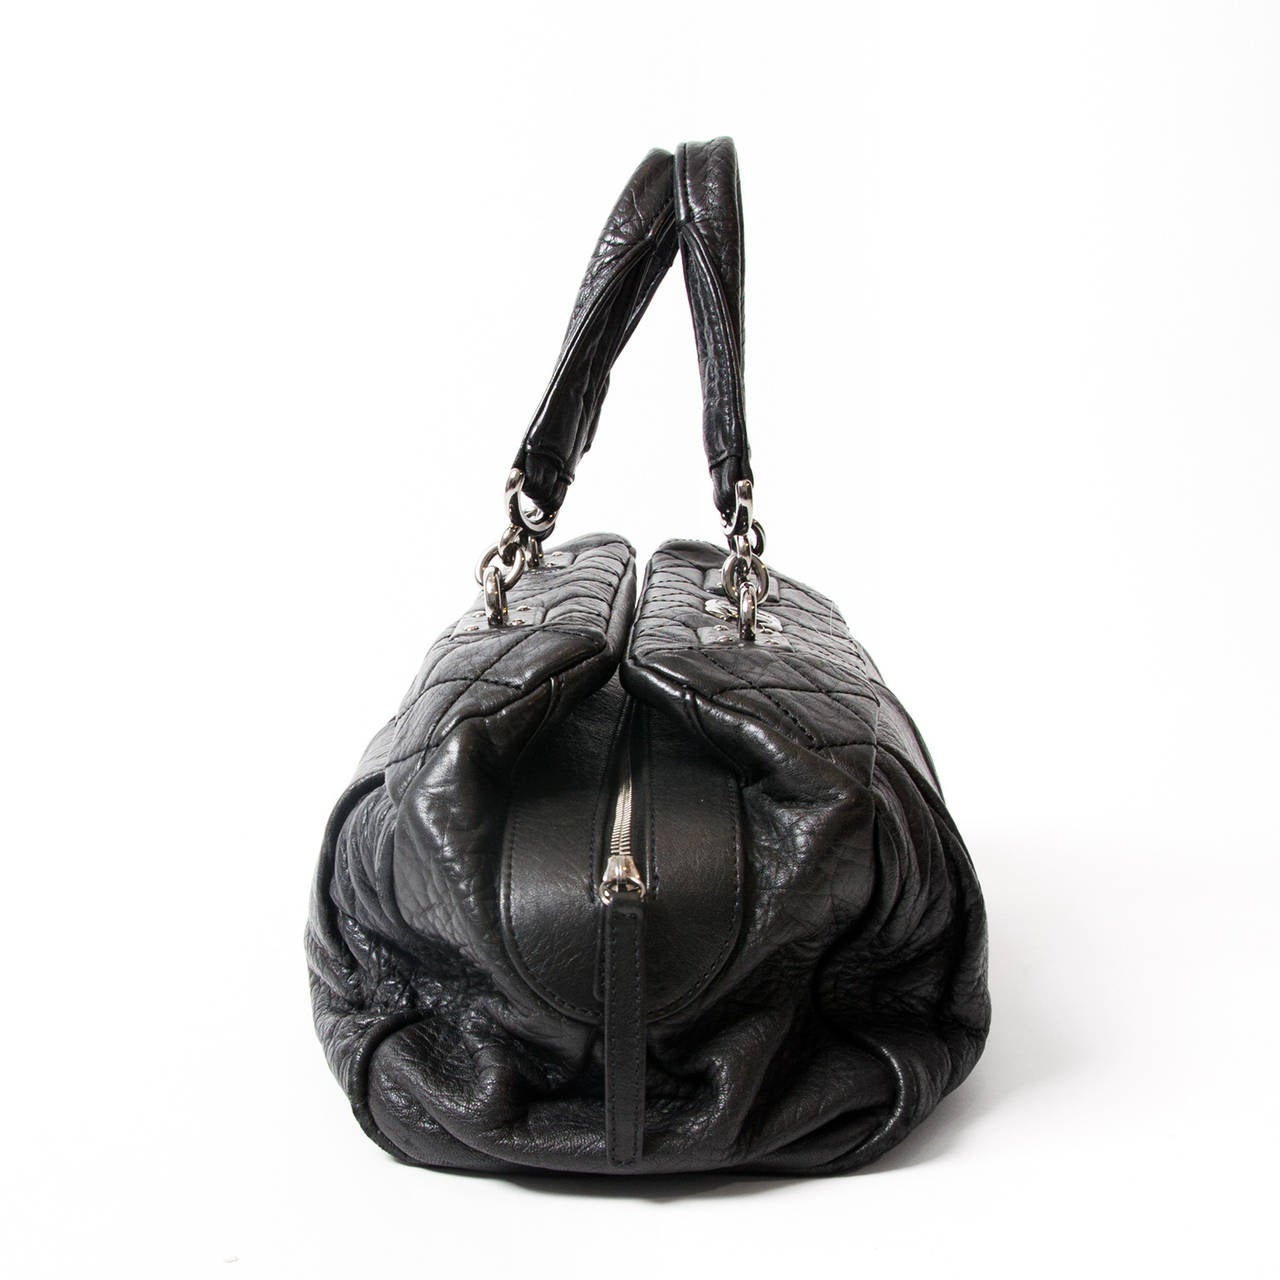 Chanel Black Doctors bag, Made out of black leather with the iconic diamond shaped stitching. There is a silver CC on the front of the bag. 
 The bag has a zip top closure. The interior has a silver leather lining and features a zipper pocket,